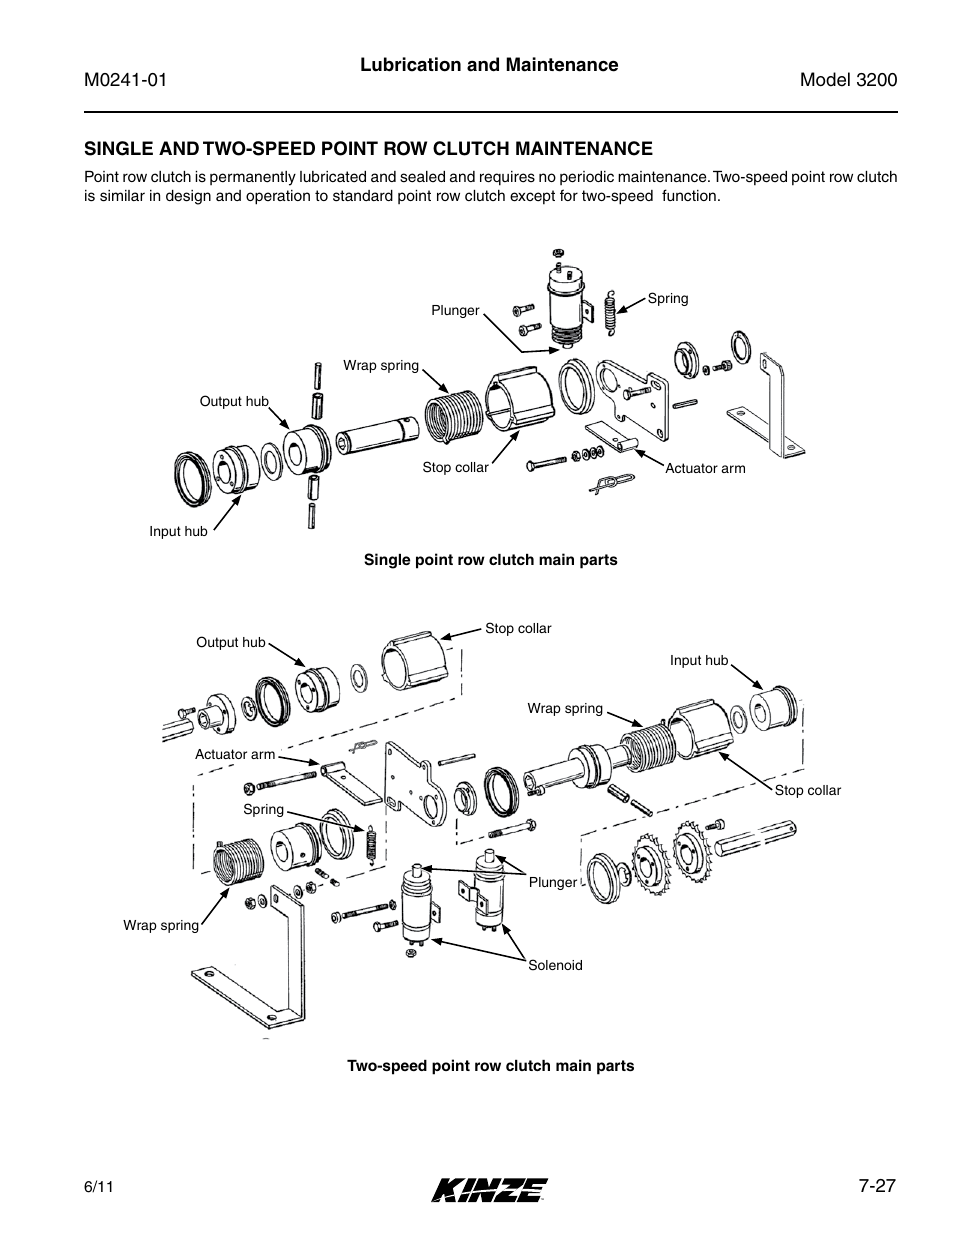 Single and two-speed point row clutch maintenance | Kinze 3200 Wing-Fold Planter Rev. 7/14 User Manual | Page 167 / 192